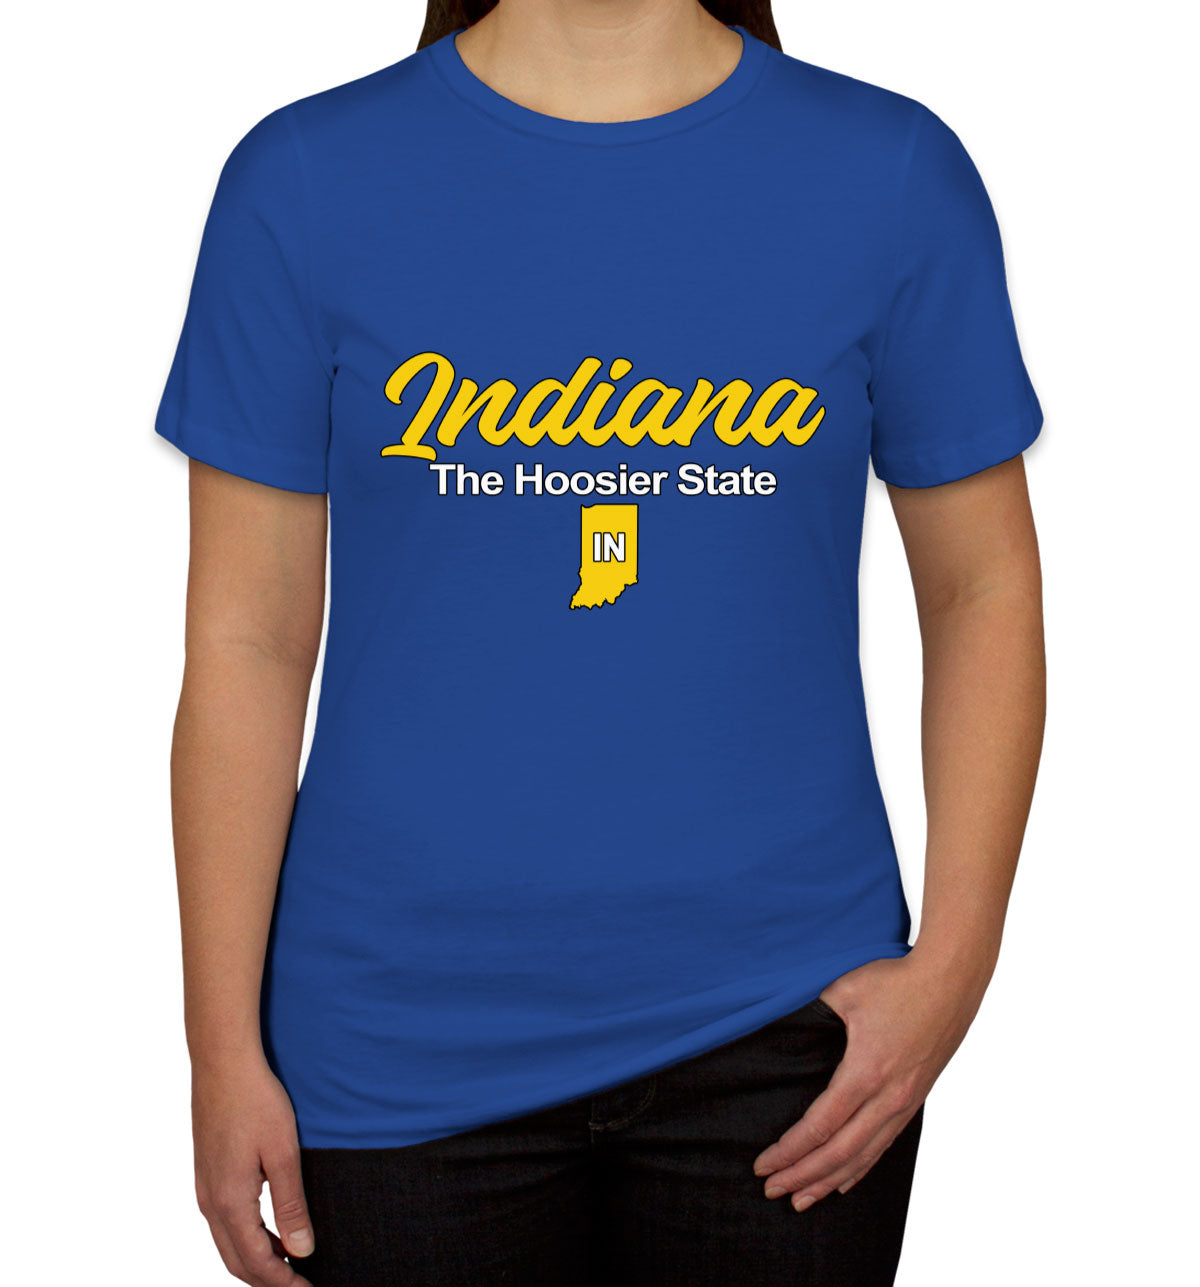 Indiana The Hoosier State Women's T-shirt